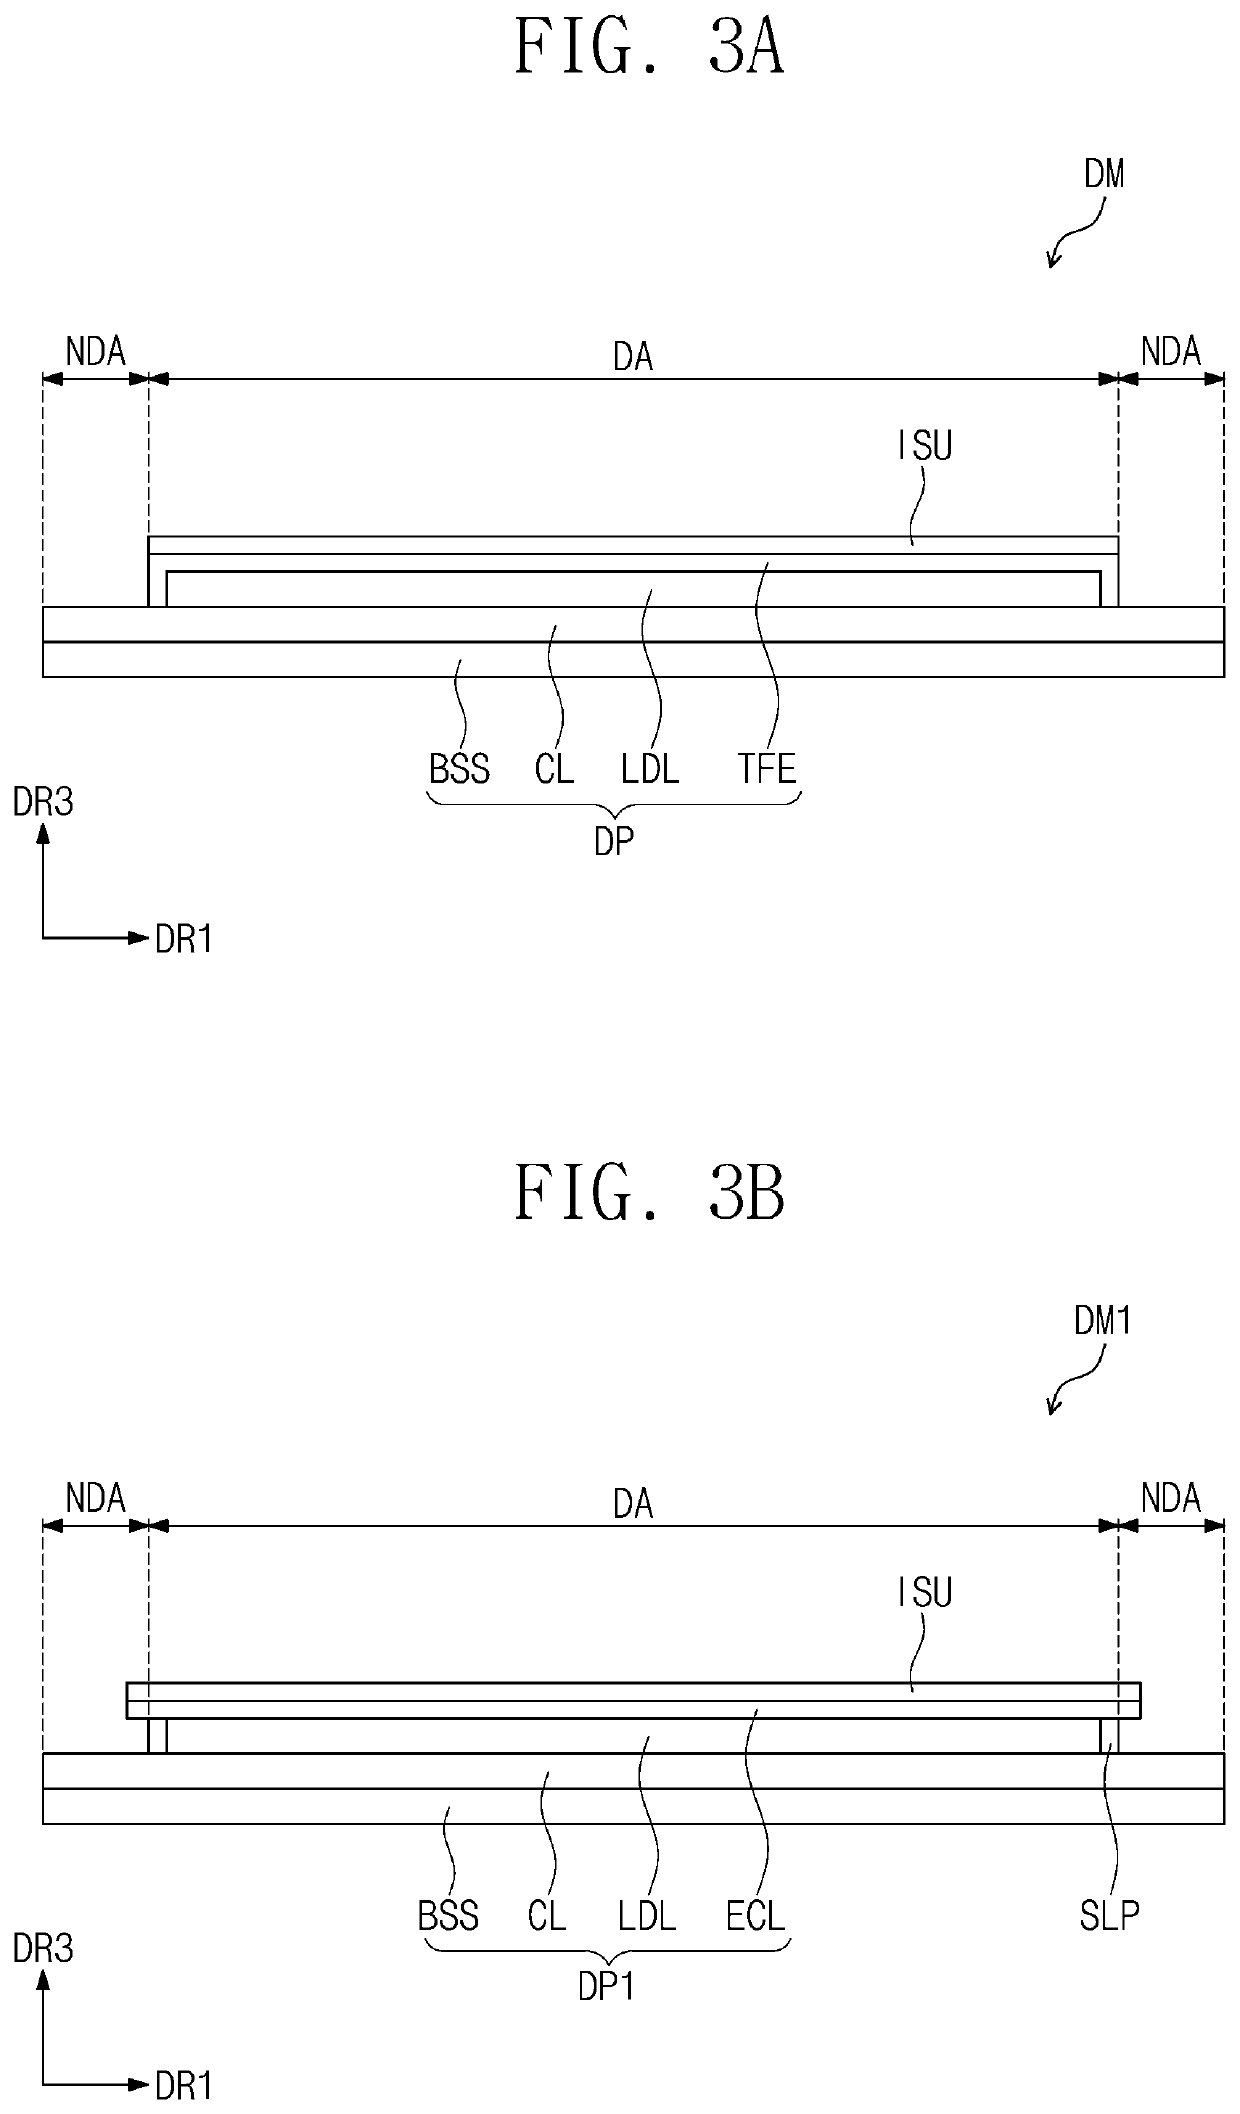 Display device having second electrode including a first portion that is not overlapped with the module hole and a second portion between the module hole and the first portion